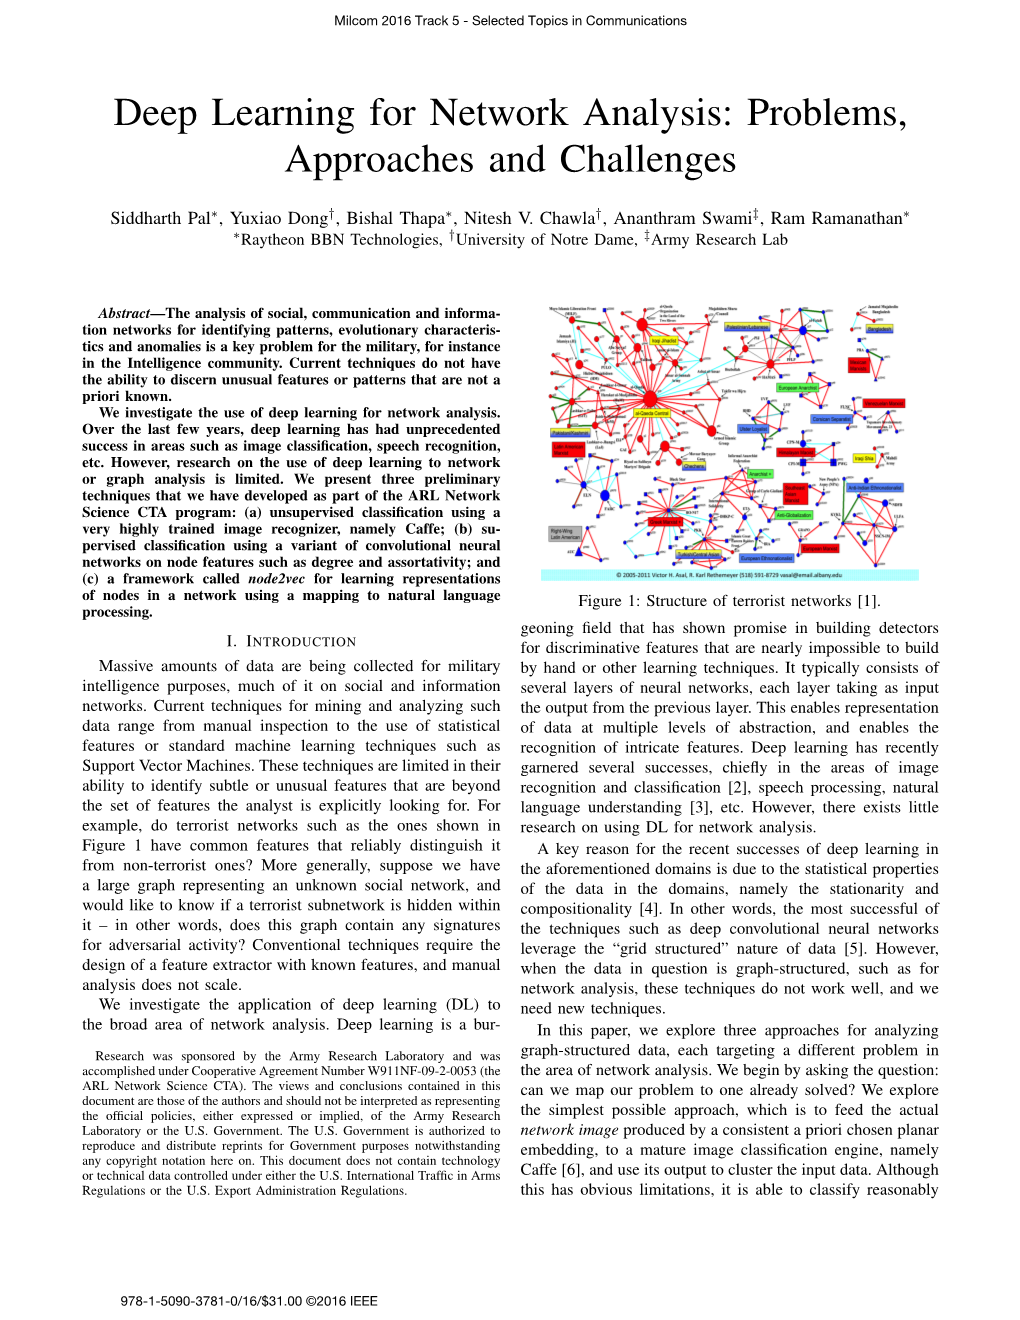 Deep Learning for Network Analysis: Problems, Approaches and Challenges